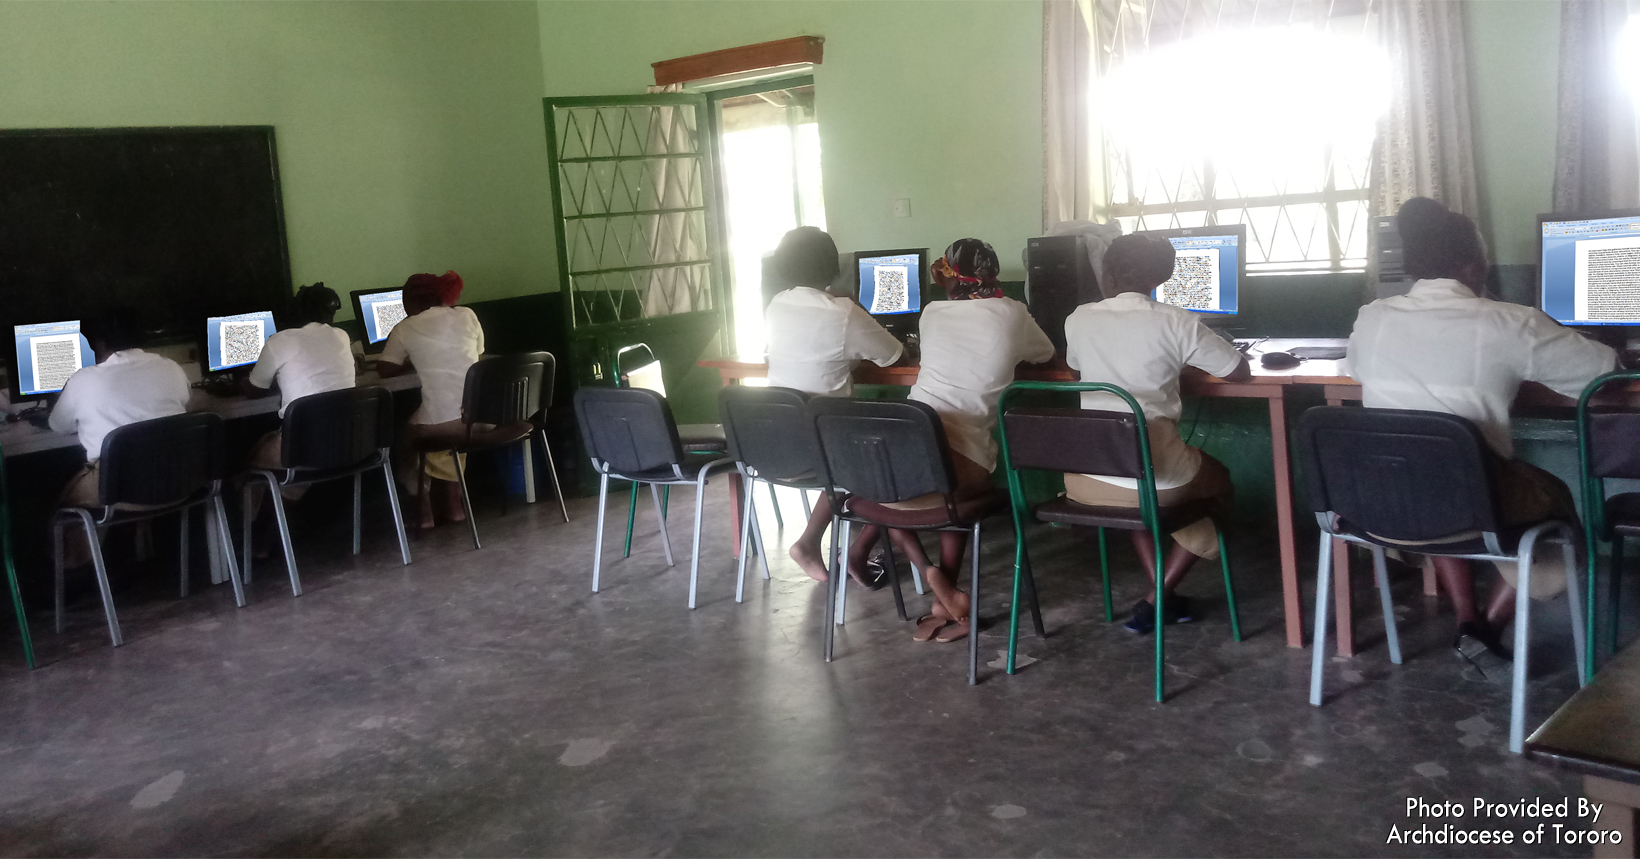 A computer lesson is held for the girls who are secretarial students.